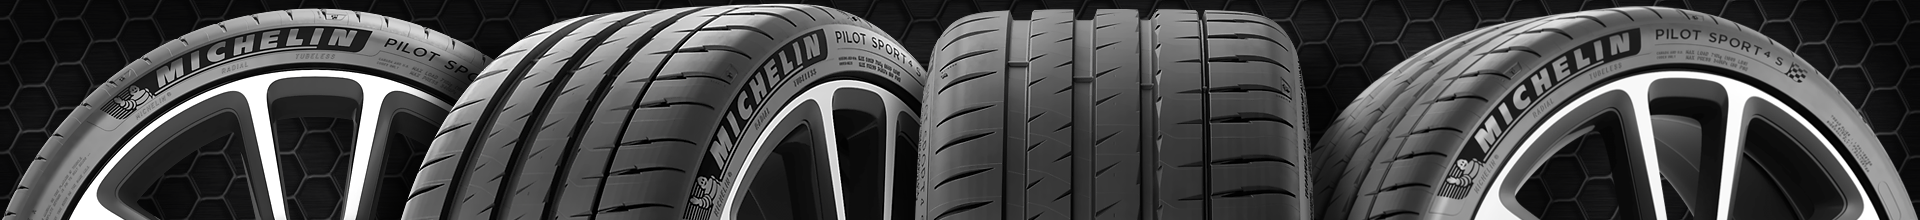 285 65 18 discount tires from Tire Outlet US